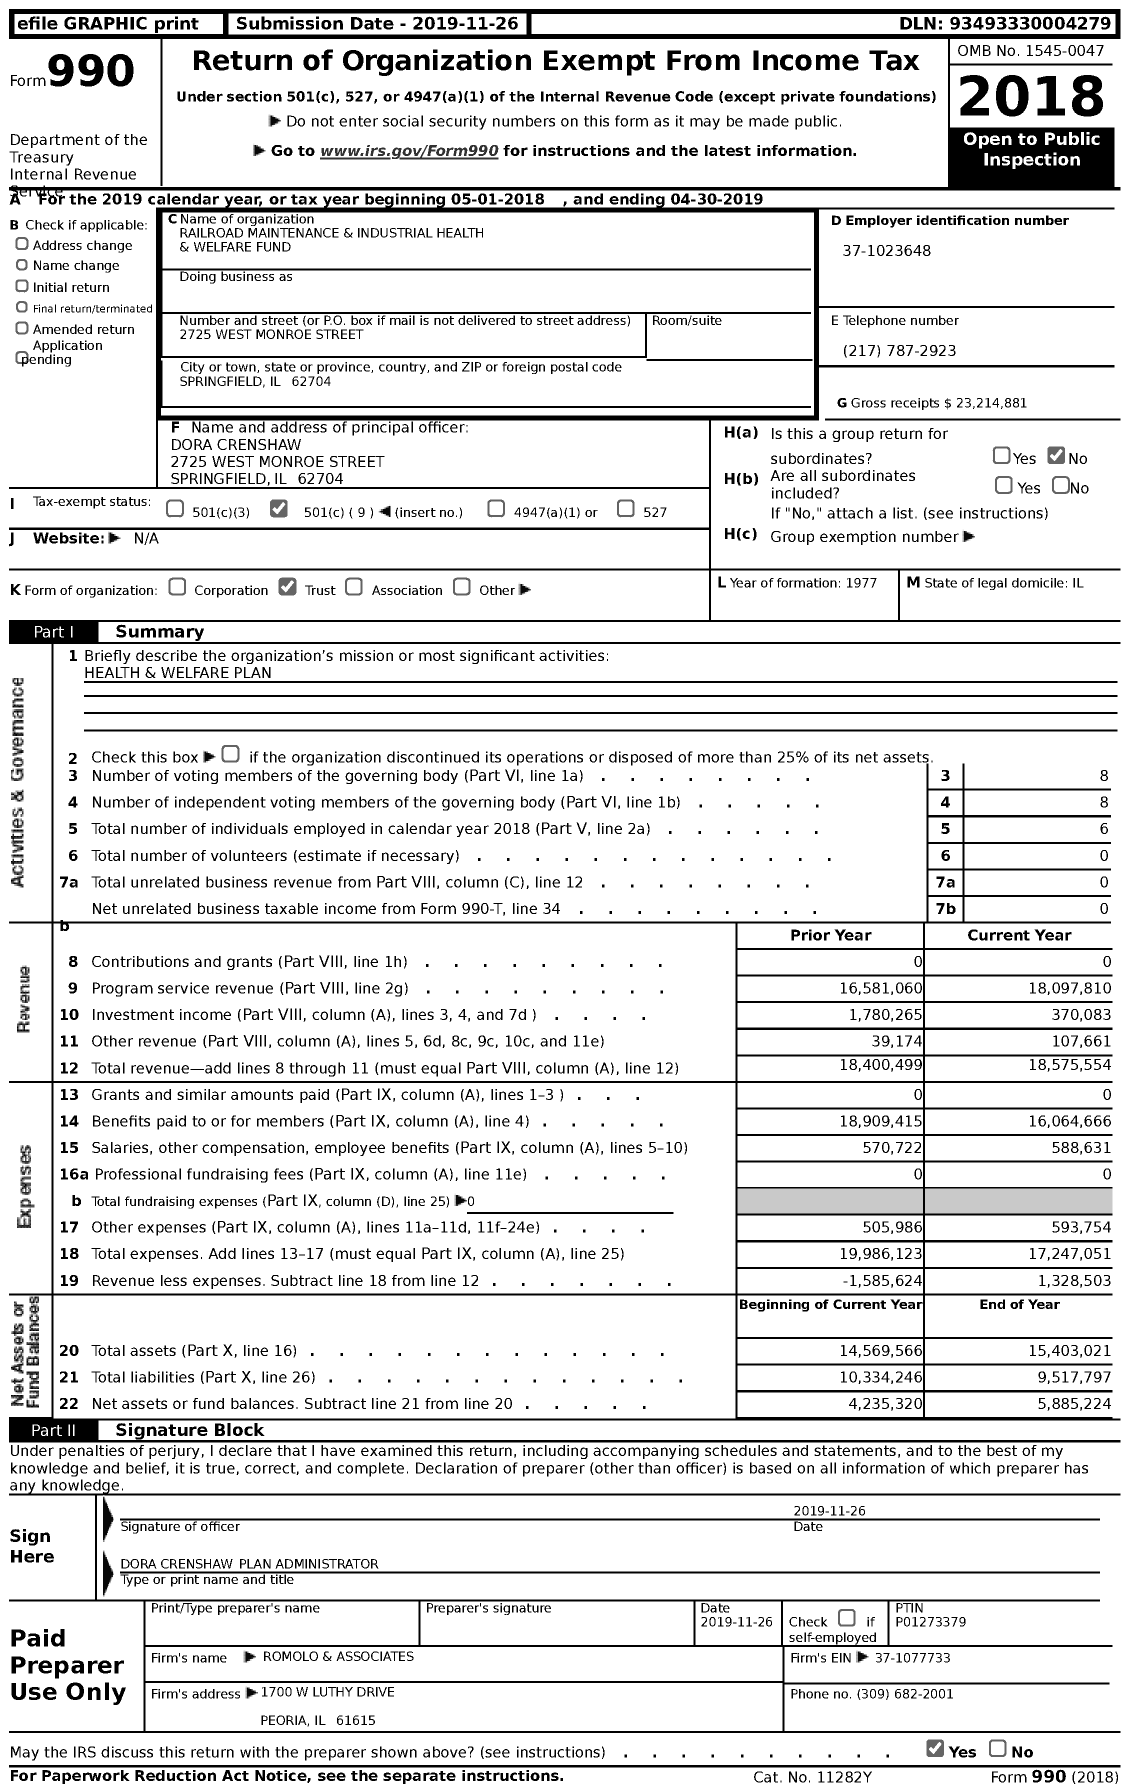 Image of first page of 2018 Form 990 for Railroad Maintenance and Industrial Health and Welfare Fund